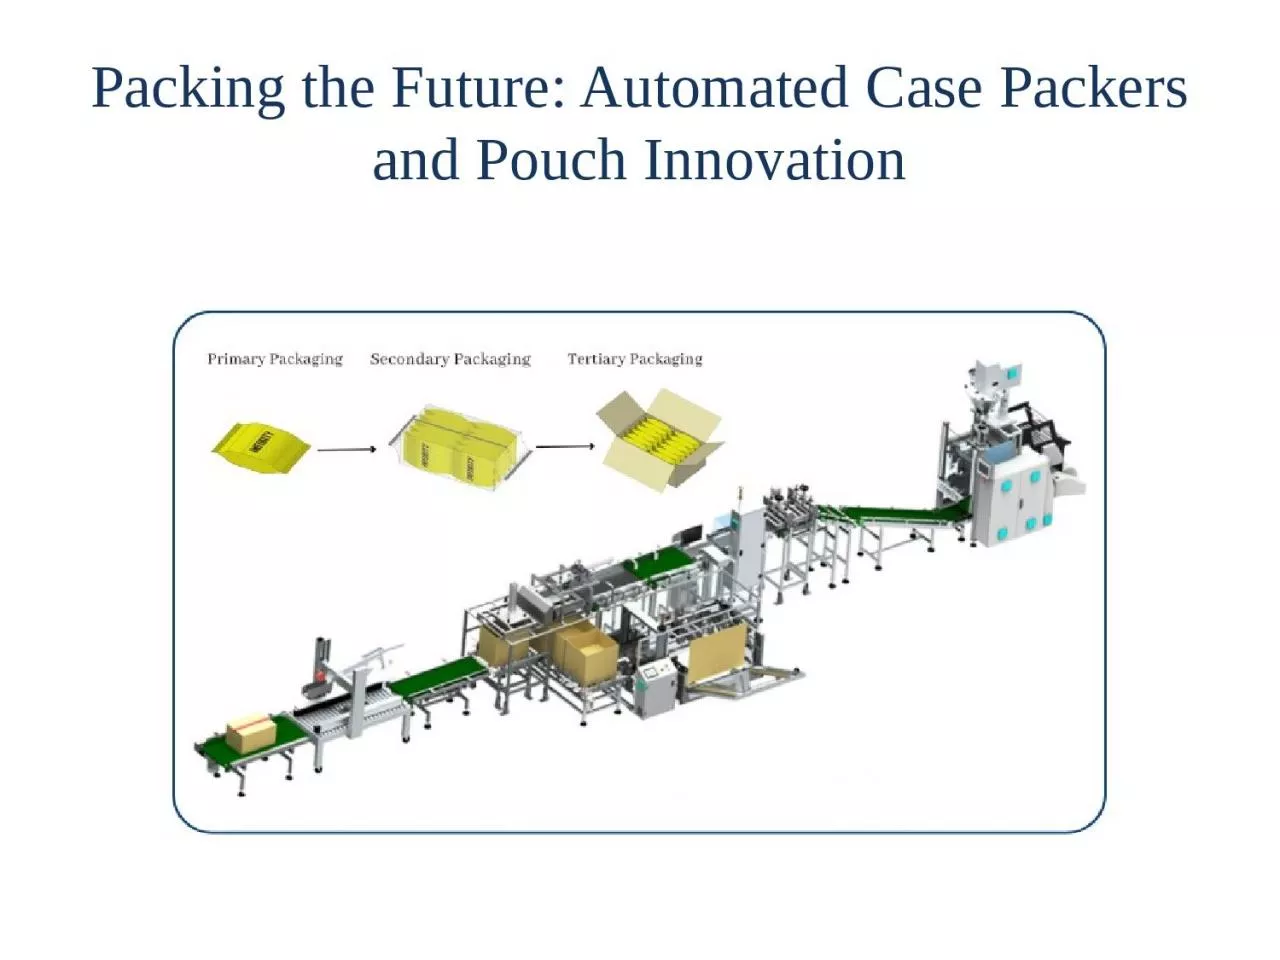 Packing the Future: Automated Case Packers and Pouch Innovation